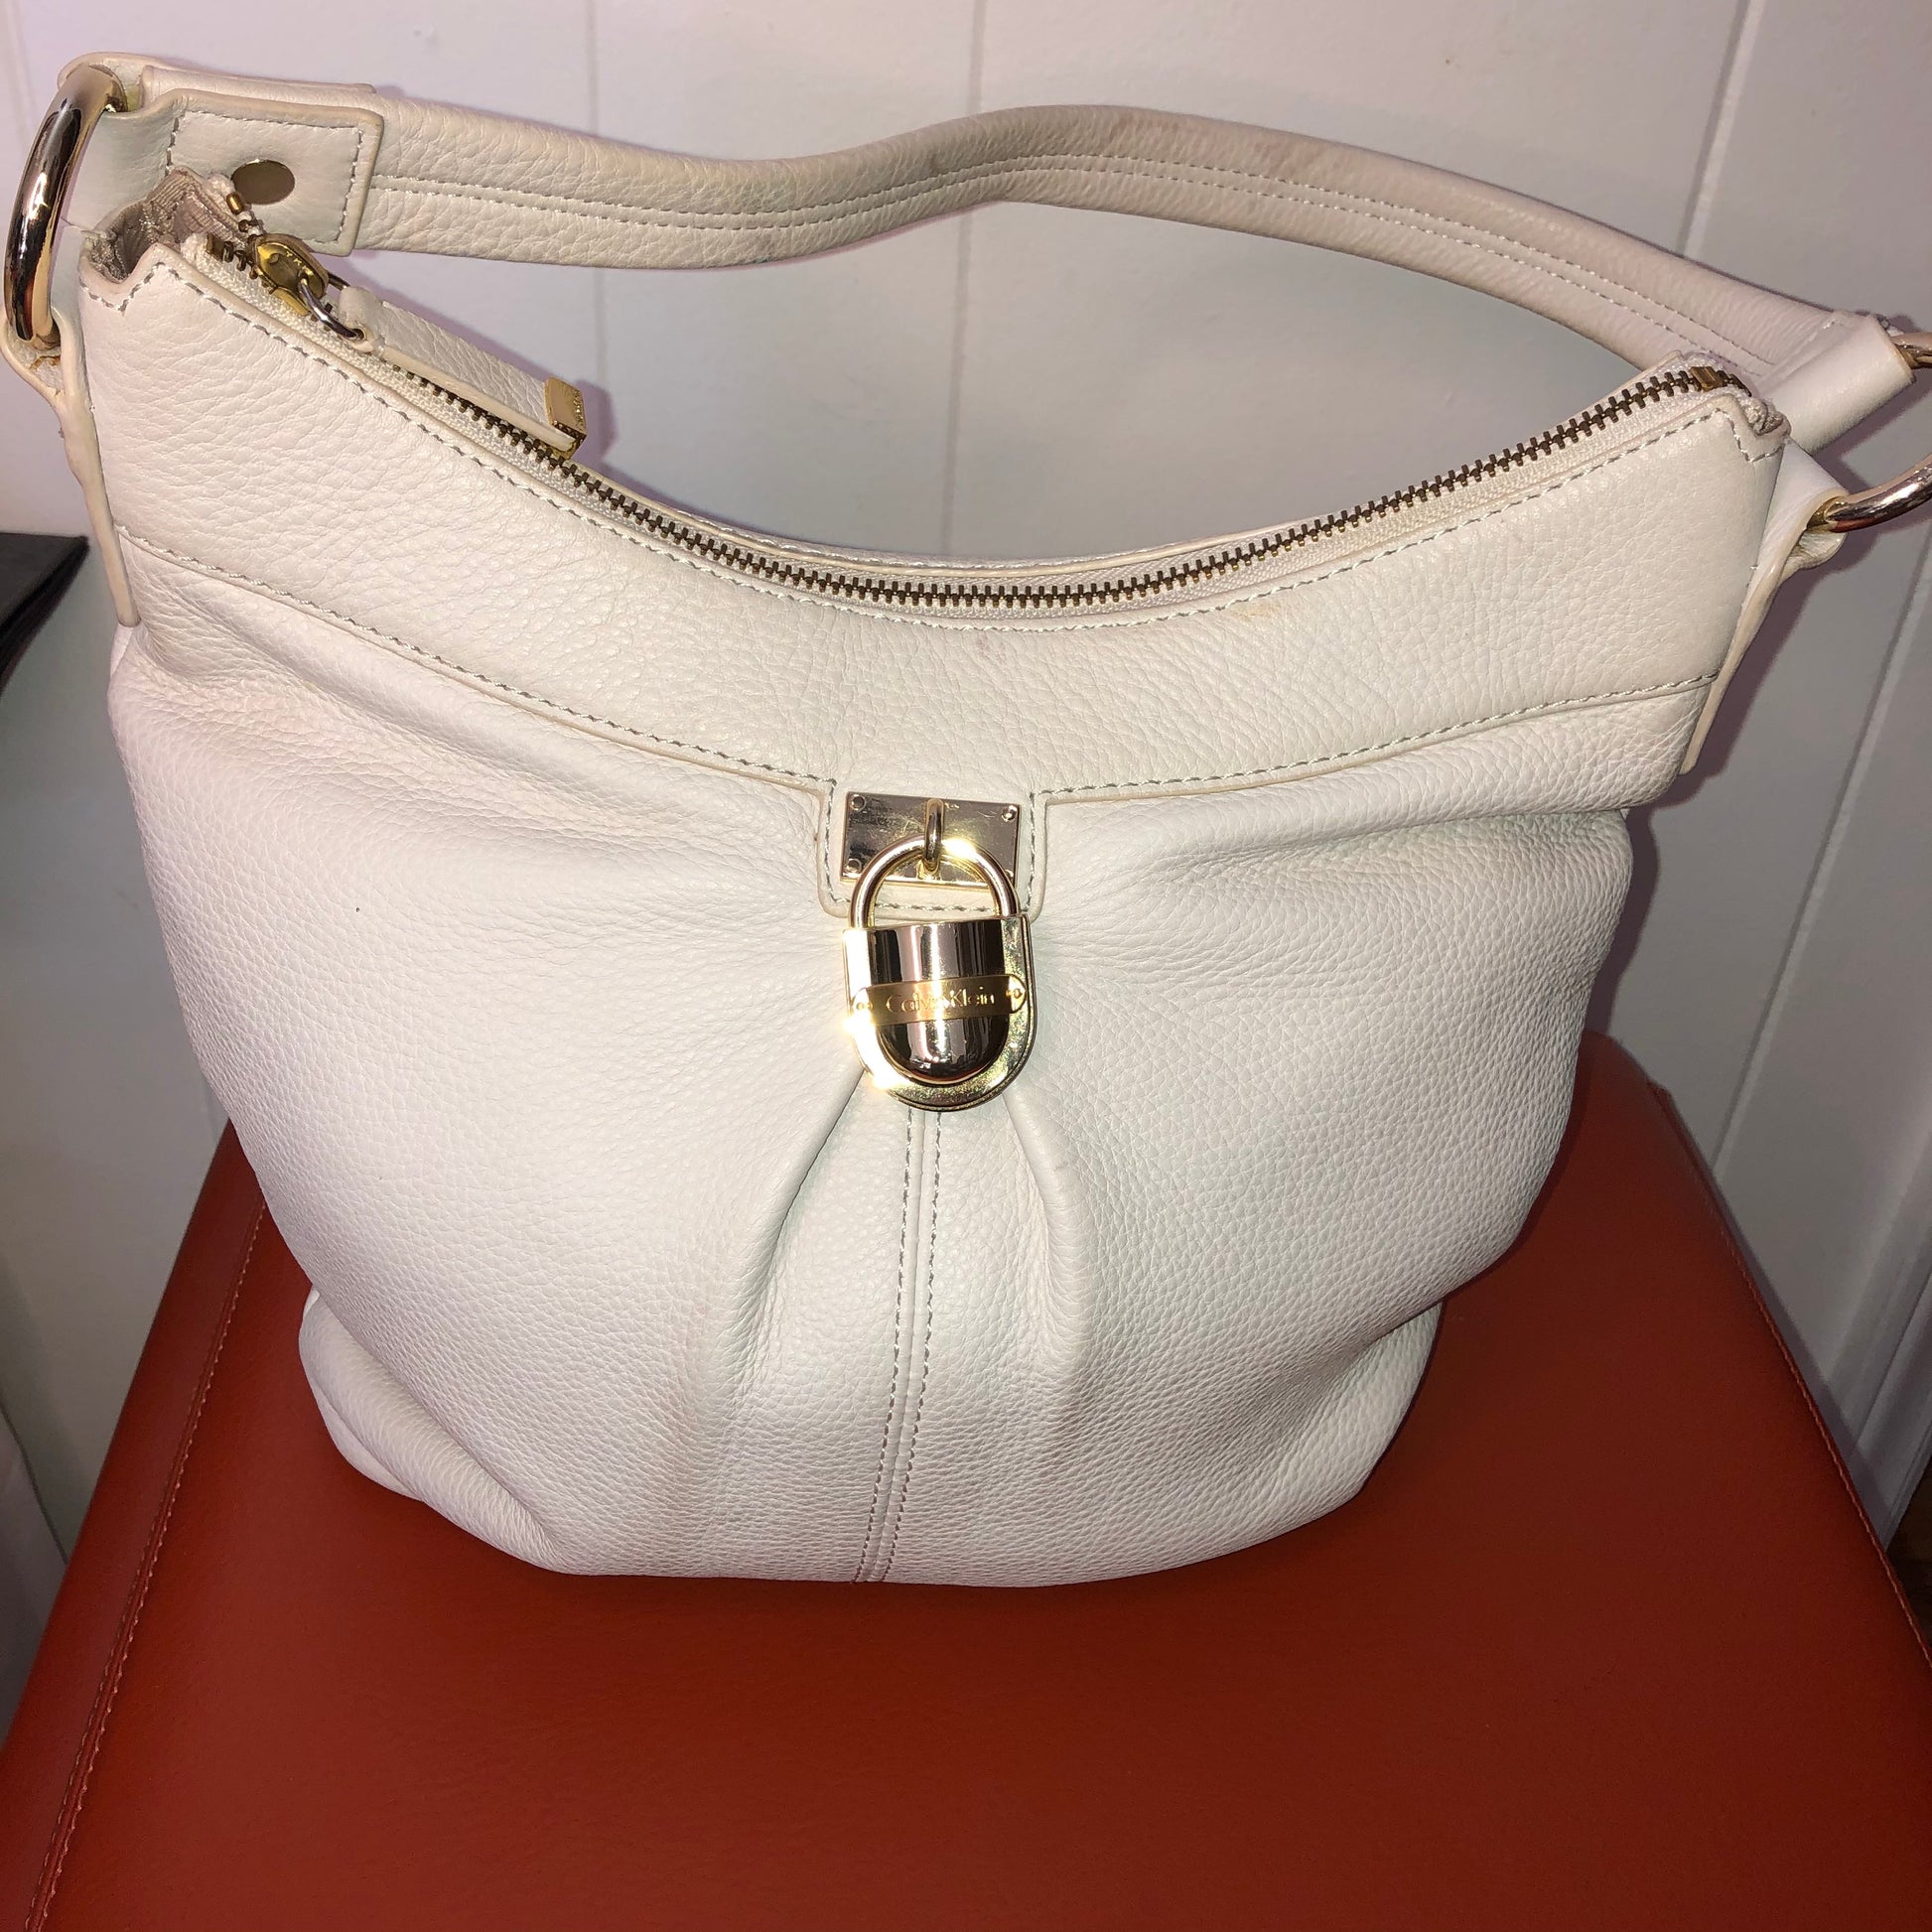 Calvin Klein Handbag Purse in Beige and Tan with Gold Tone Hardware